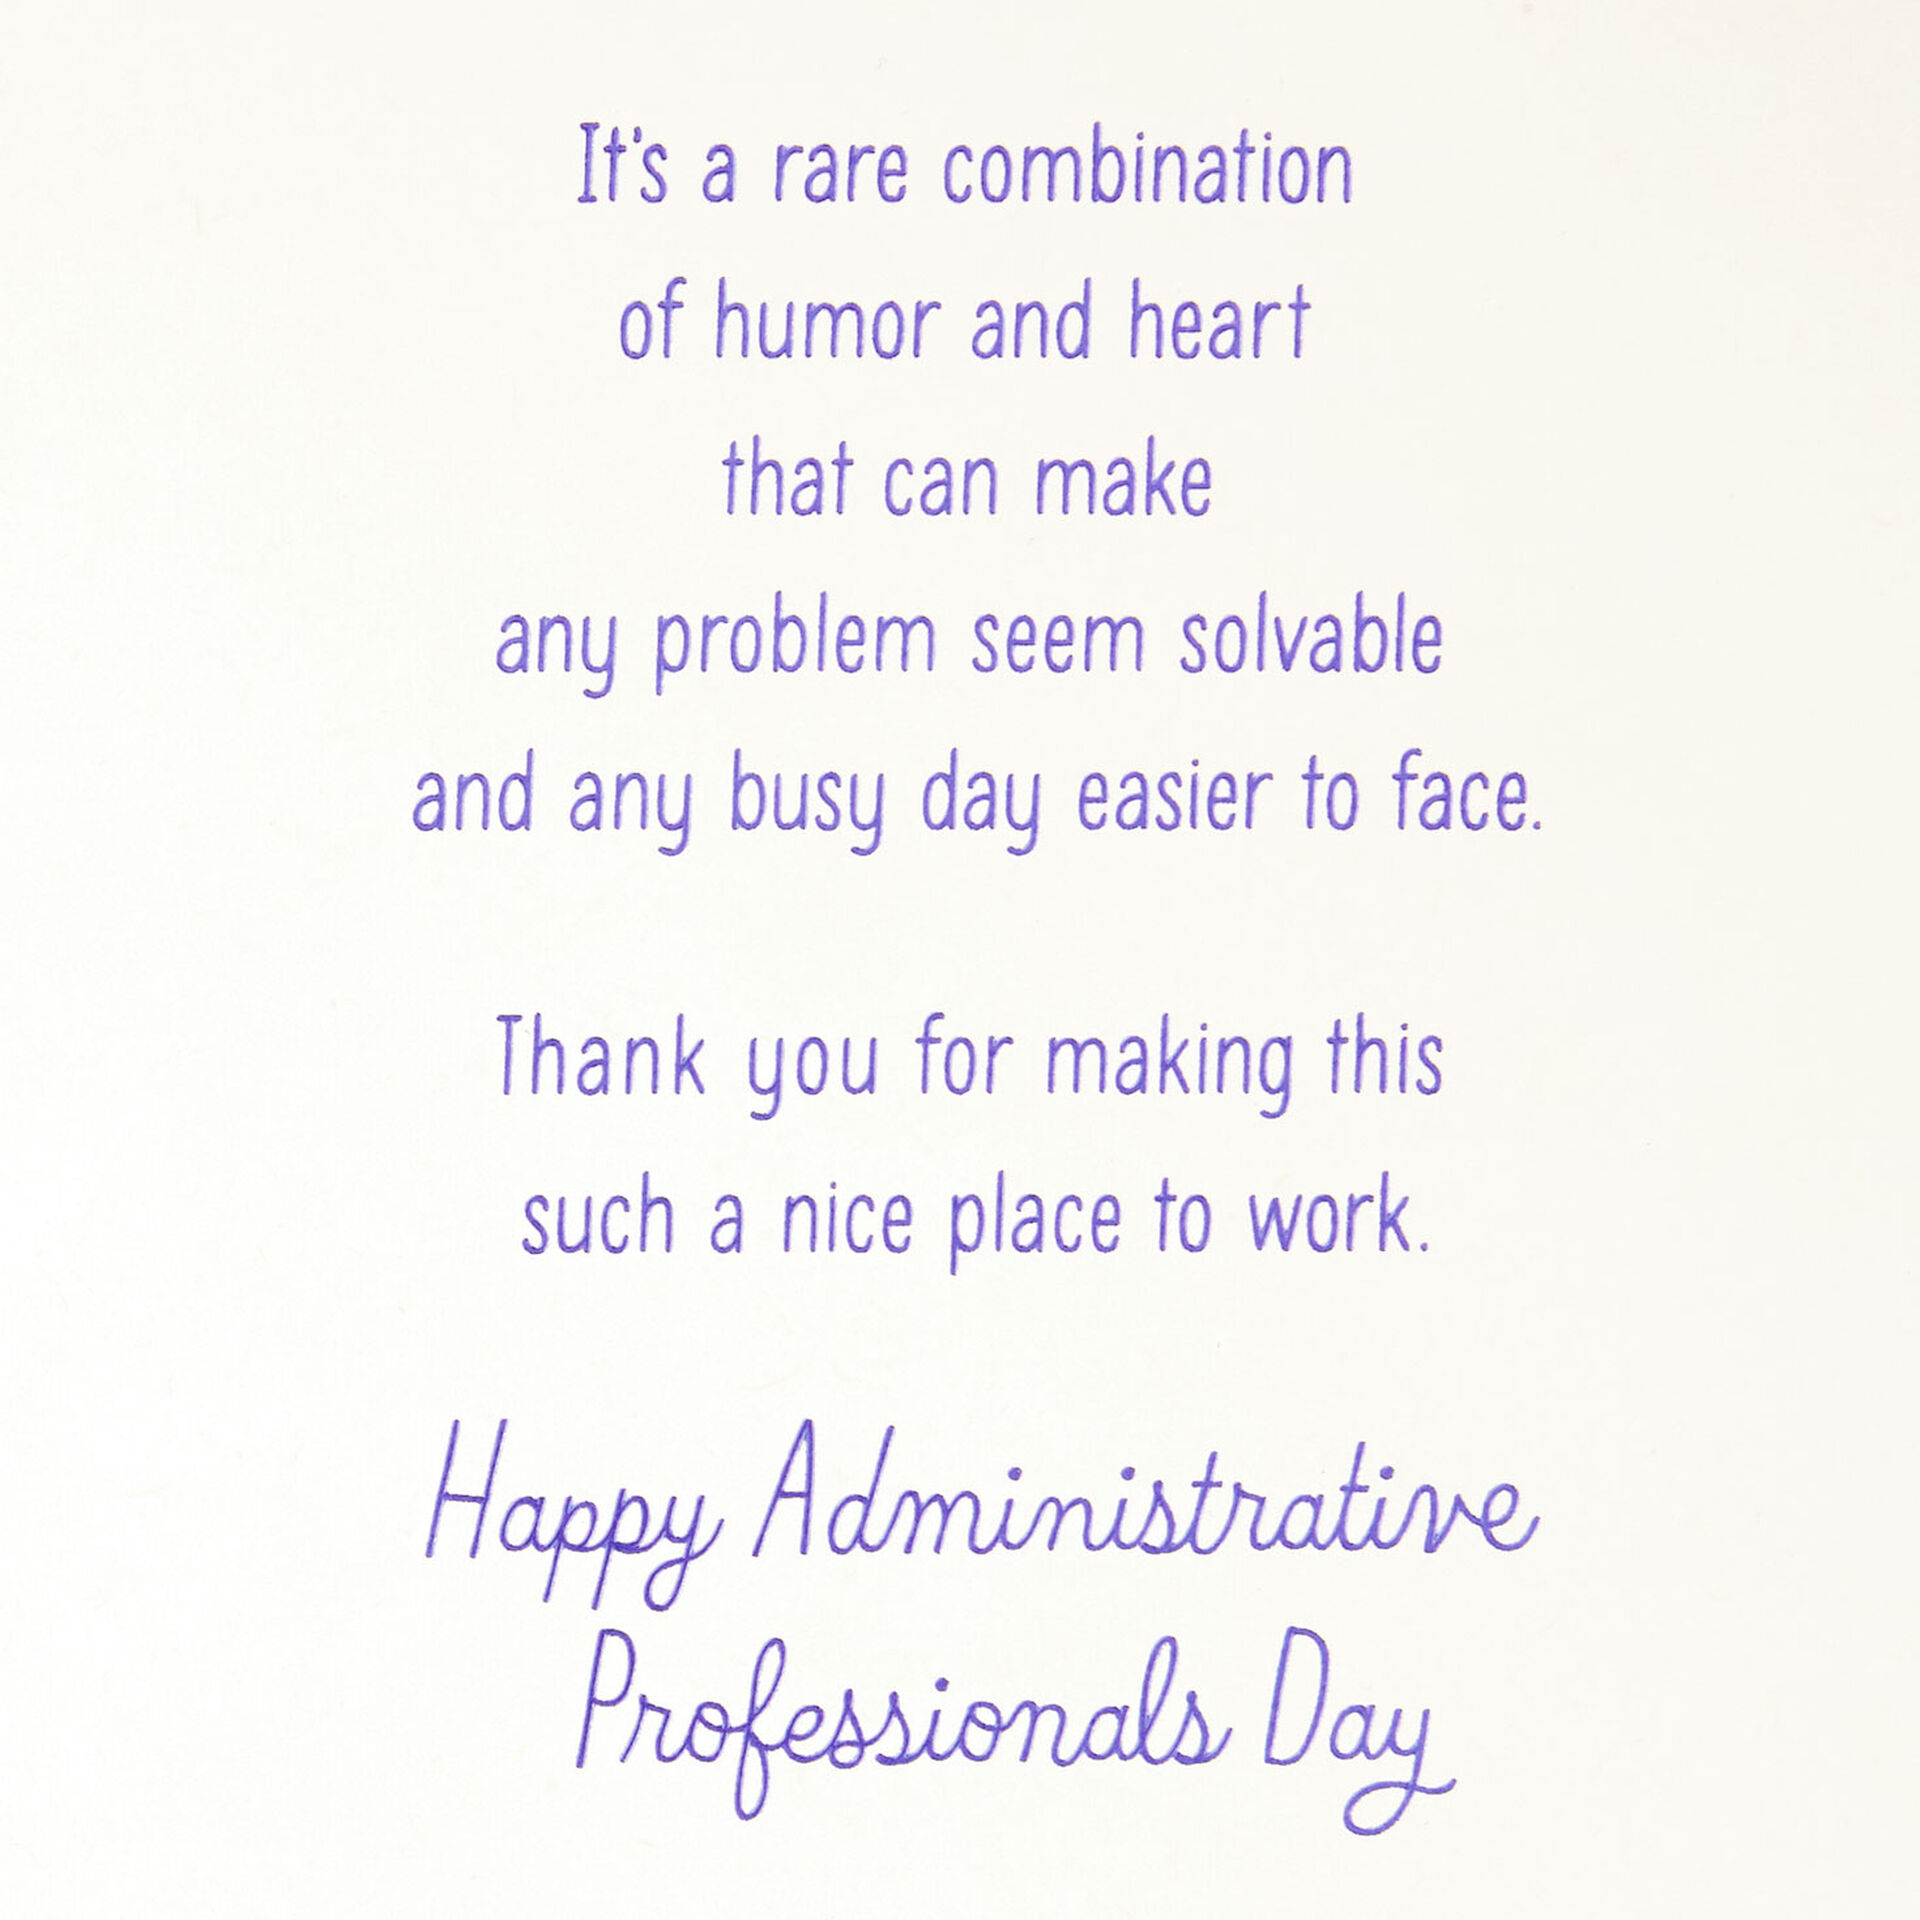 Your Humor and Heart Admin Professionals Day Card Greeting Cards